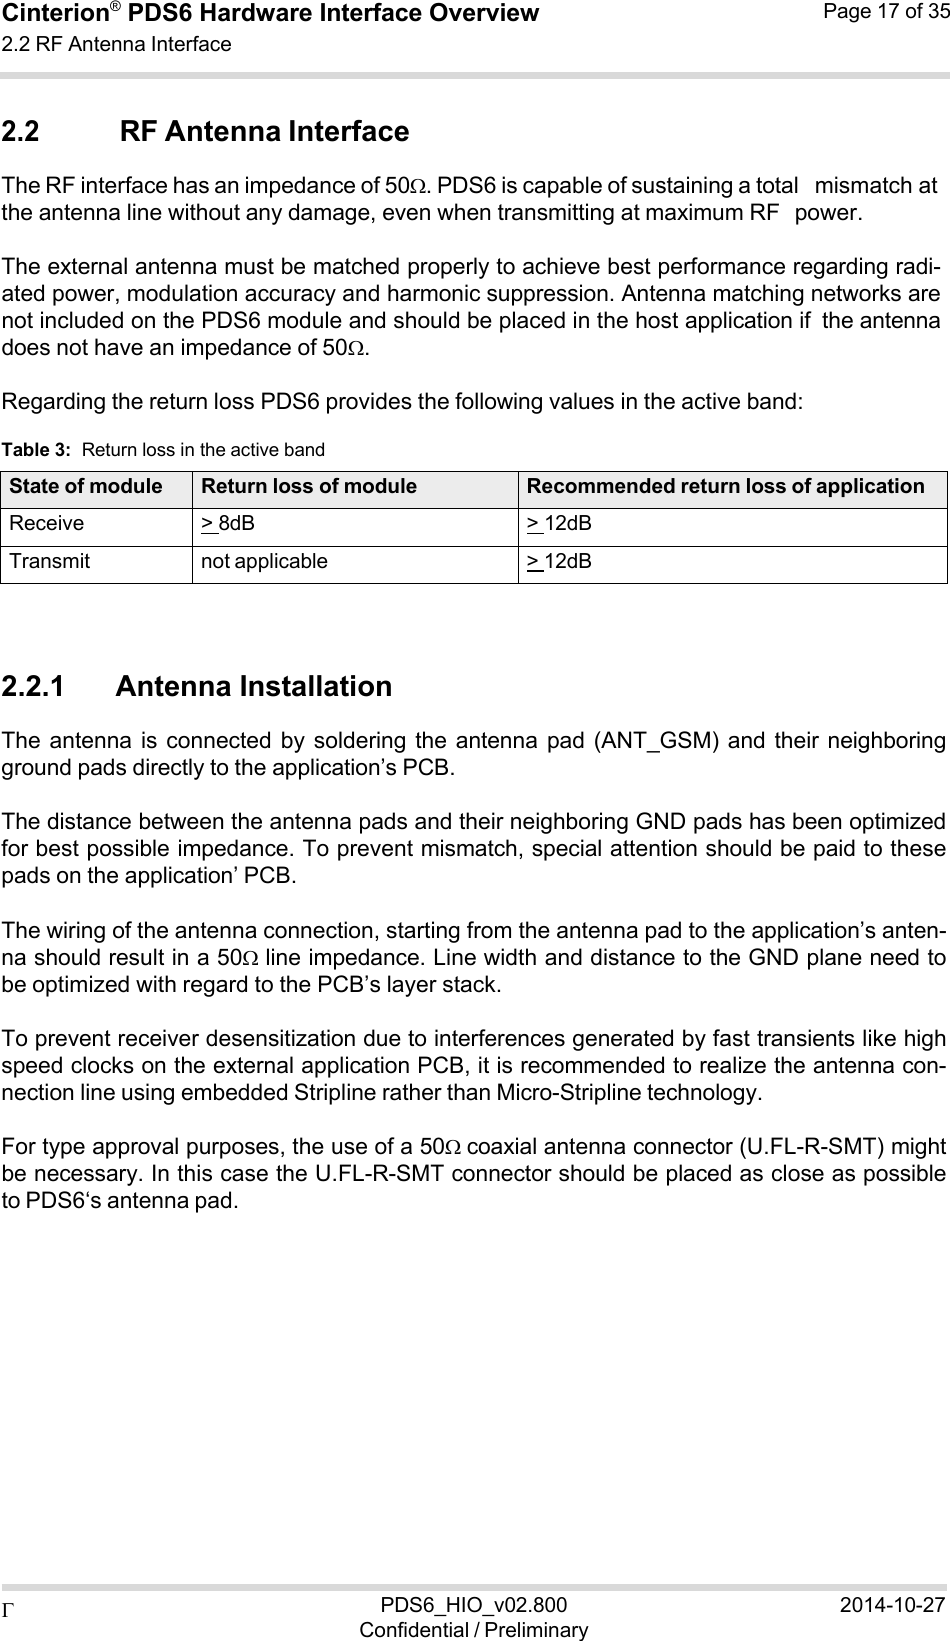  PDS6_HIO_v02.800Confidential / Preliminary2014-10-27Cinterion®  PDS6 Hardware Interface Overview 2.2 RF Antenna Interface Page 17 of 35   2.2 RF Antenna Interface The RF interface has an impedance of 50. PDS6 is capable of sustaining a total mismatch at the antenna line without any damage, even when transmitting at maximum RF power.  The external antenna must be matched properly to achieve best performance regarding radi- ated power, modulation accuracy and harmonic suppression. Antenna matching networks are not included on the PDS6 module and should be placed in the host application if the antenna does not have an impedance of 50.  Regarding the return loss PDS6 provides the following values in the active band:  Table 3:  Return loss in the active band  State of module Return loss of module Recommended return loss of applicationReceive &gt; 8dB &gt; 12dBTransmit not applicable &gt; 12dB   2.2.1      Antenna Installation The antenna  is connected  by  soldering  the antenna  pad (ANT_GSM)  and their  neighboring ground pads directly to the application’s PCB.  The distance between the antenna pads and their neighboring GND pads has been optimized for best possible impedance. To prevent mismatch, special attention should be paid to these pads on the application’ PCB.  The wiring of the antenna connection, starting from the antenna pad to the application’s anten- na should result in a 50 line impedance. Line width and distance to the GND plane need to be optimized with regard to the PCB’s layer stack.  To prevent receiver desensitization due to interferences generated by fast transients like high speed clocks on the external application PCB, it is recommended to realize the antenna con- nection line using embedded Stripline rather than Micro-Stripline technology.  For type approval purposes, the use of a 50coaxial antenna connector (U.FL-R-SMT) might be necessary. In this case the U.FL-R-SMT connector should be placed as close as possible to PDS6‘s antenna pad. 